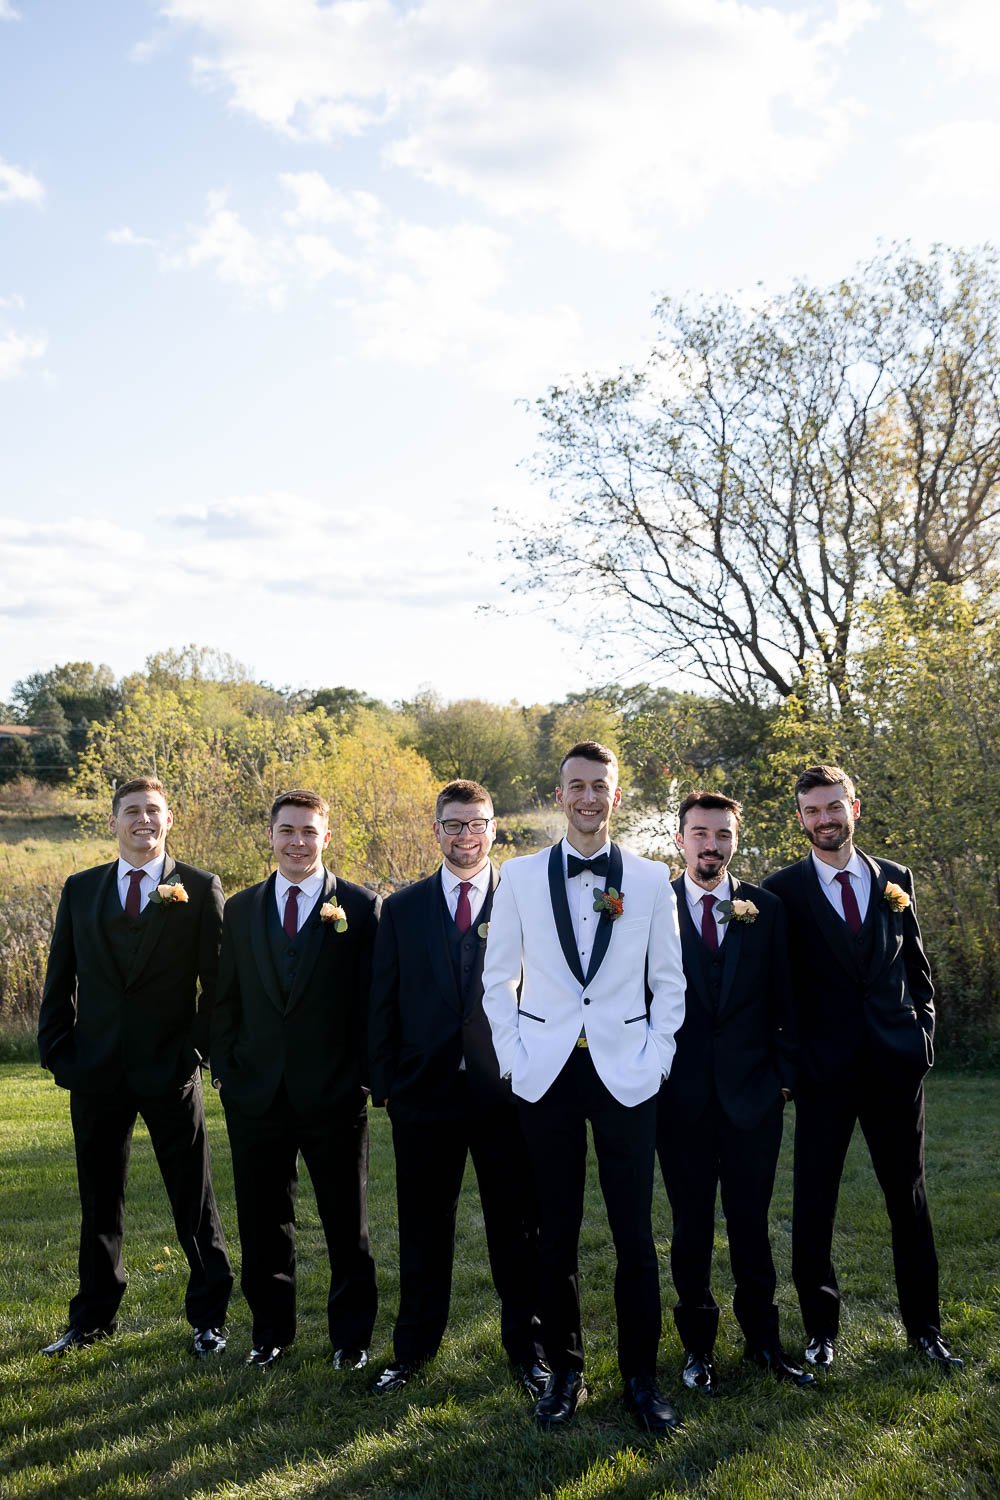 black and white groomsmen suits at wales wedding venue